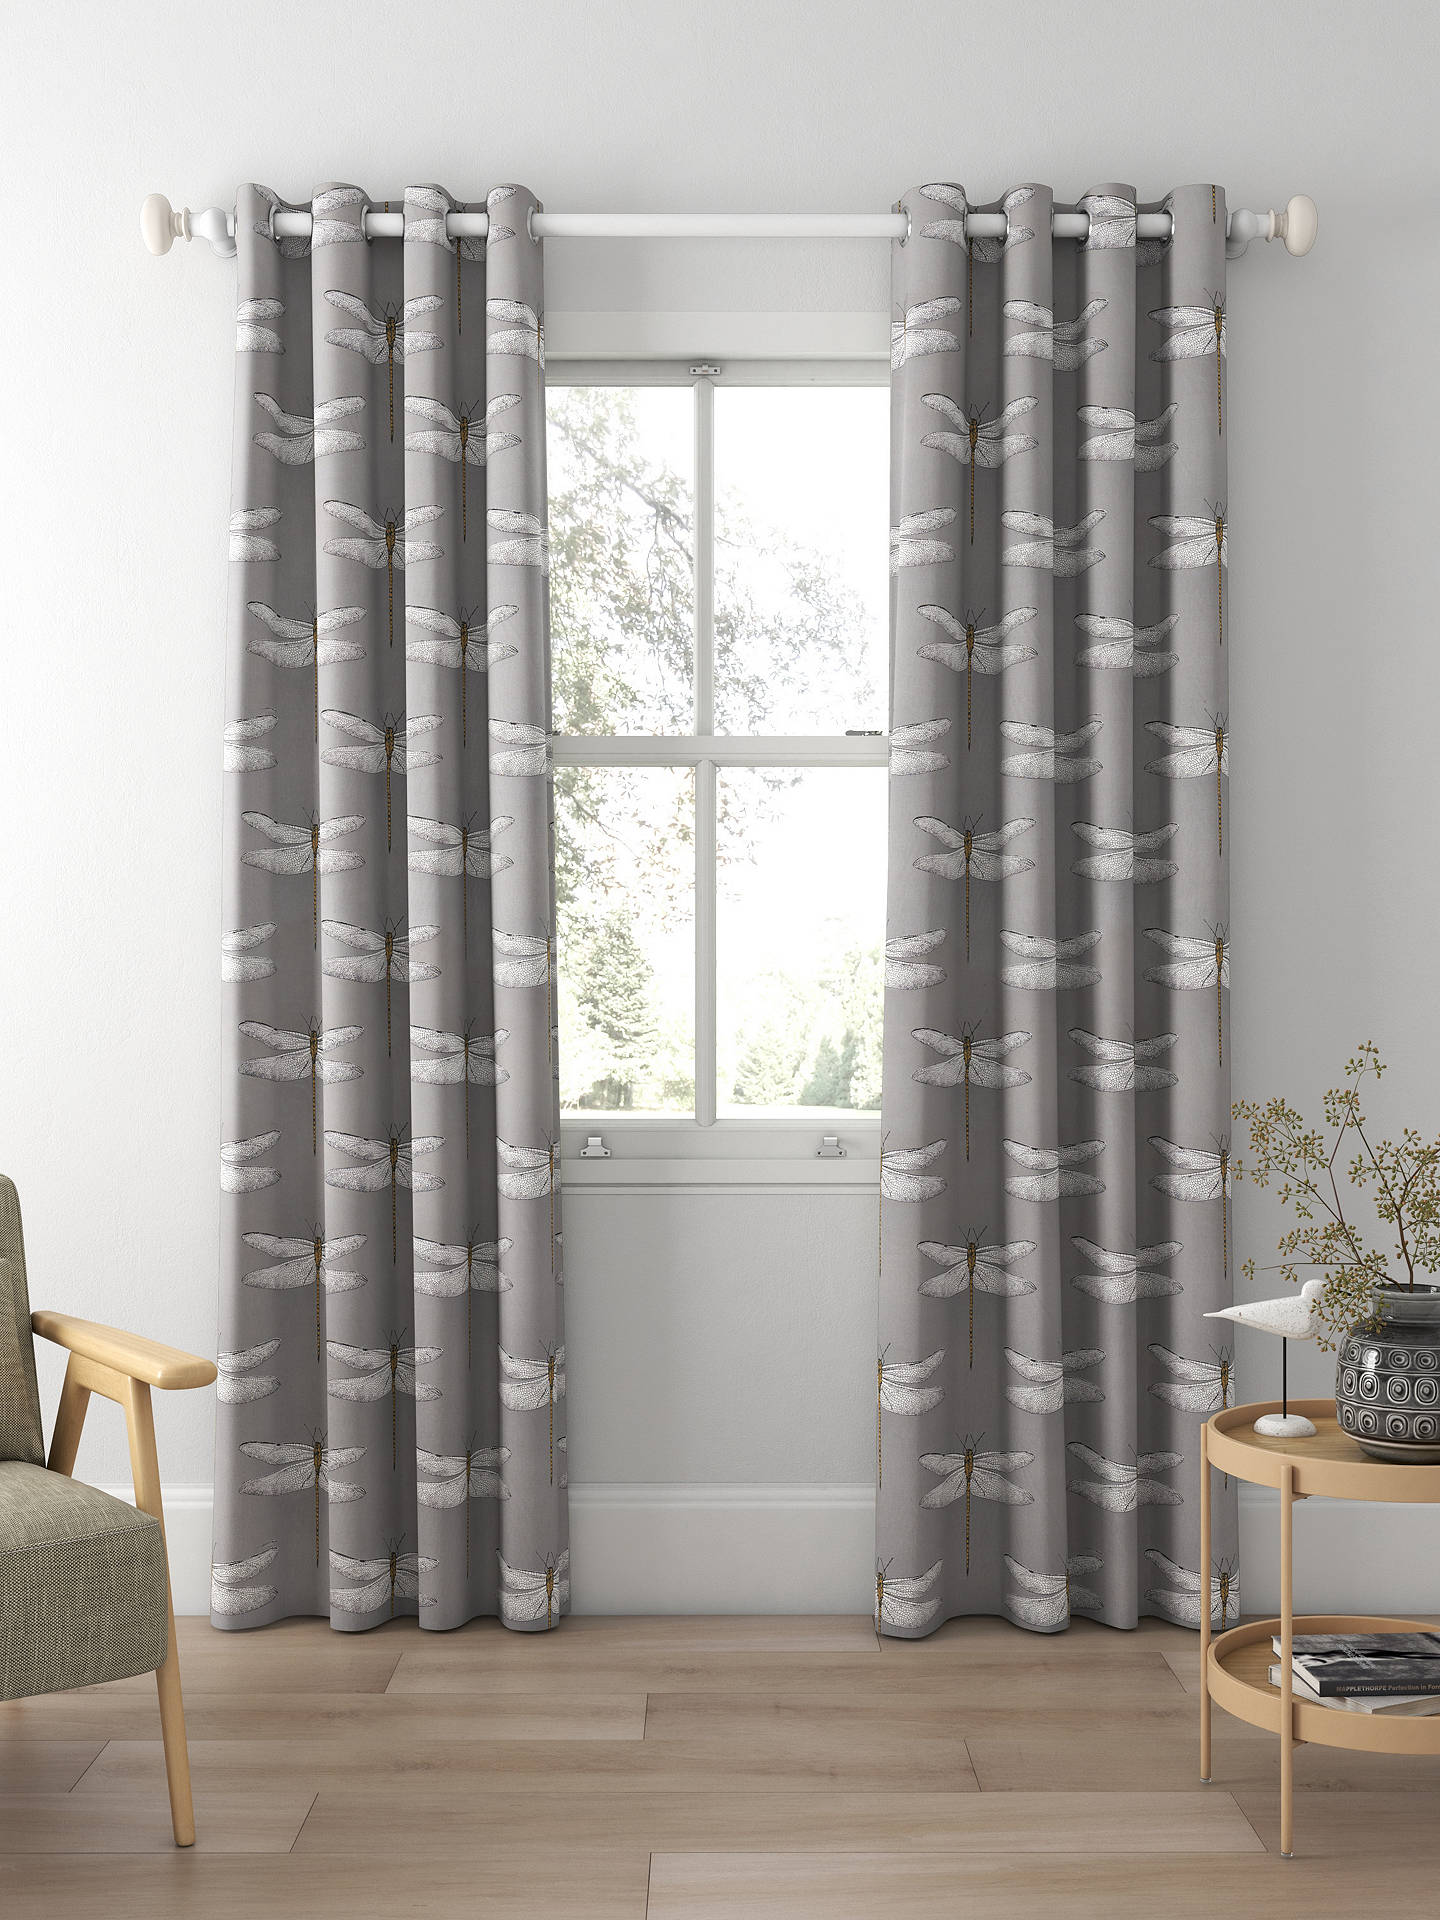 Harlequin Demoiselle Made to Measure Curtains, Graphite/Almond